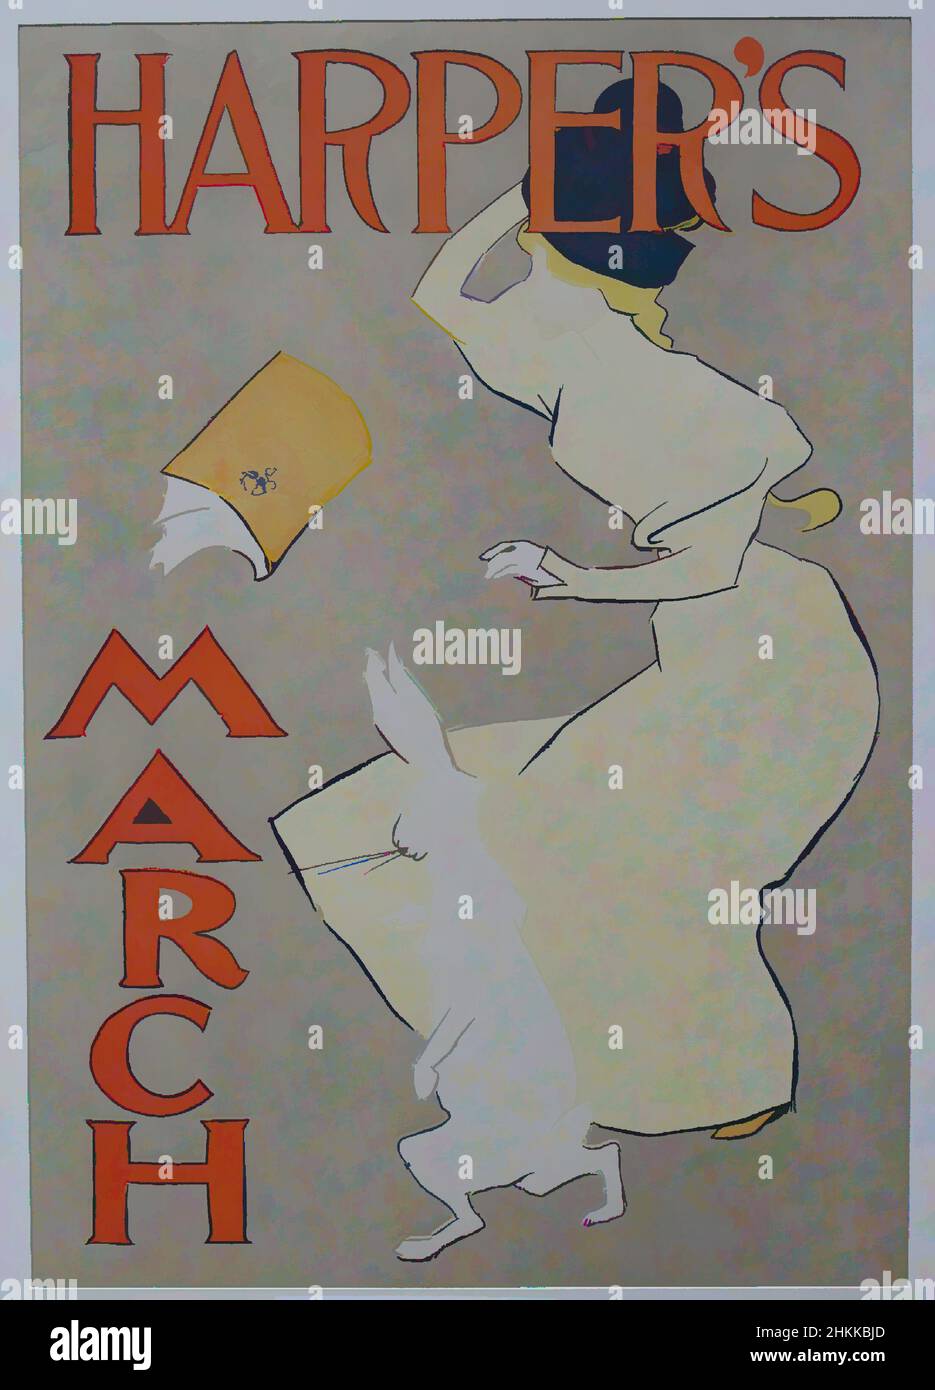 Art inspired by Harper's Poster - March 1895, Edward Penfield, American, 1866-1925, Lithograph on wove paper, 1895, Sheet: 19 1/4 x 13 7/8 in., 48.9 x 35.2 cm, book, bunny, dress, fin de siecle, hat, rabbit, style, windy, woman, women and books, Classic works modernized by Artotop with a splash of modernity. Shapes, color and value, eye-catching visual impact on art. Emotions through freedom of artworks in a contemporary way. A timeless message pursuing a wildly creative new direction. Artists turning to the digital medium and creating the Artotop NFT Stock Photo